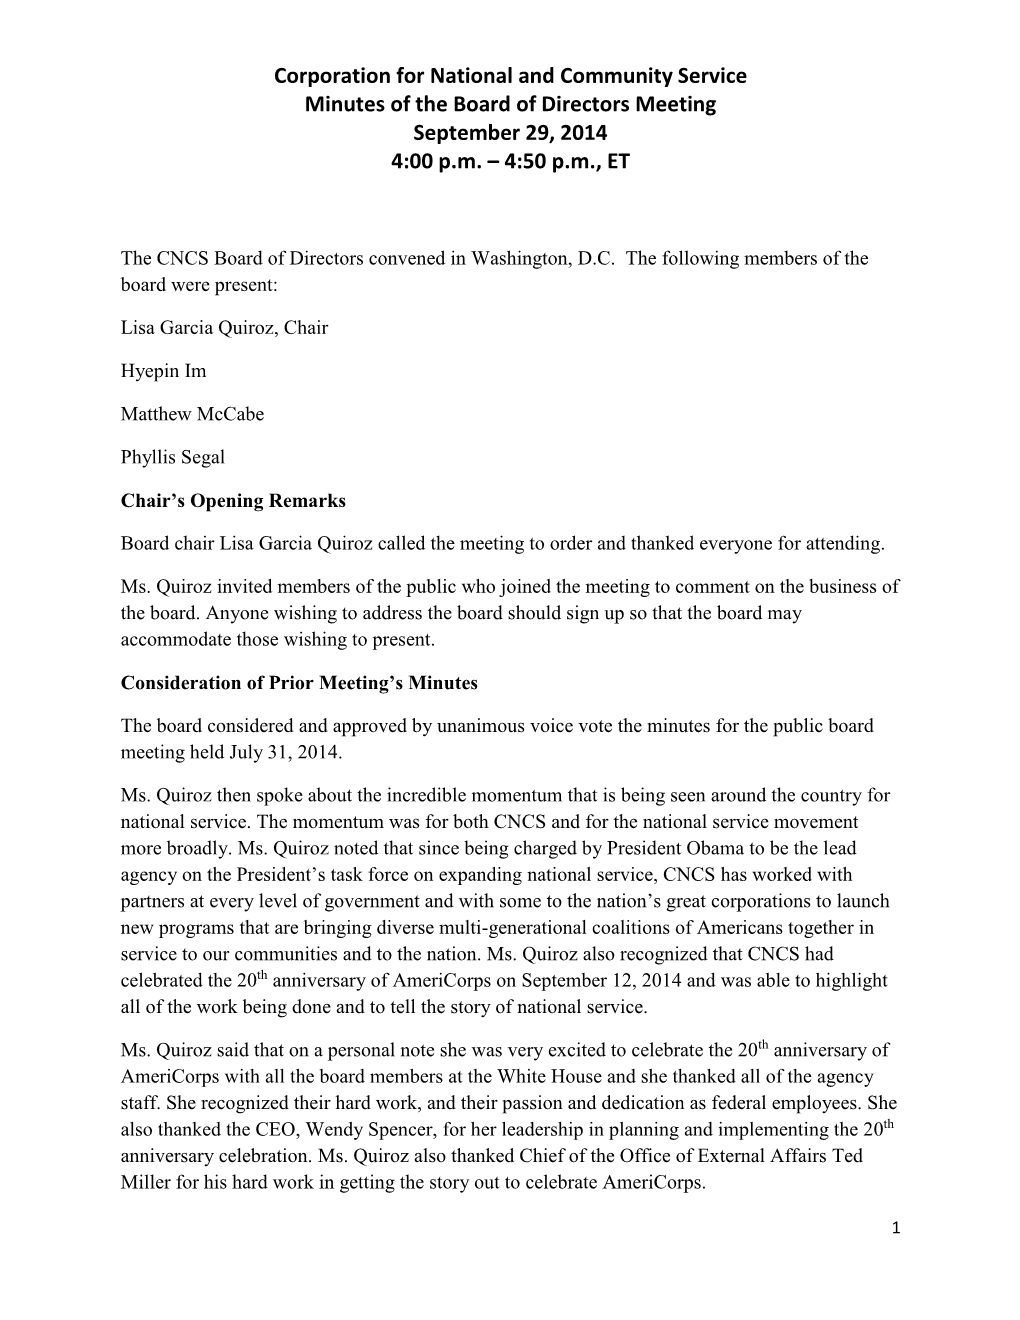 Corporation for National and Community Service Minutes of the Board of Directors Meeting September 29, 2014 4:00 P.M